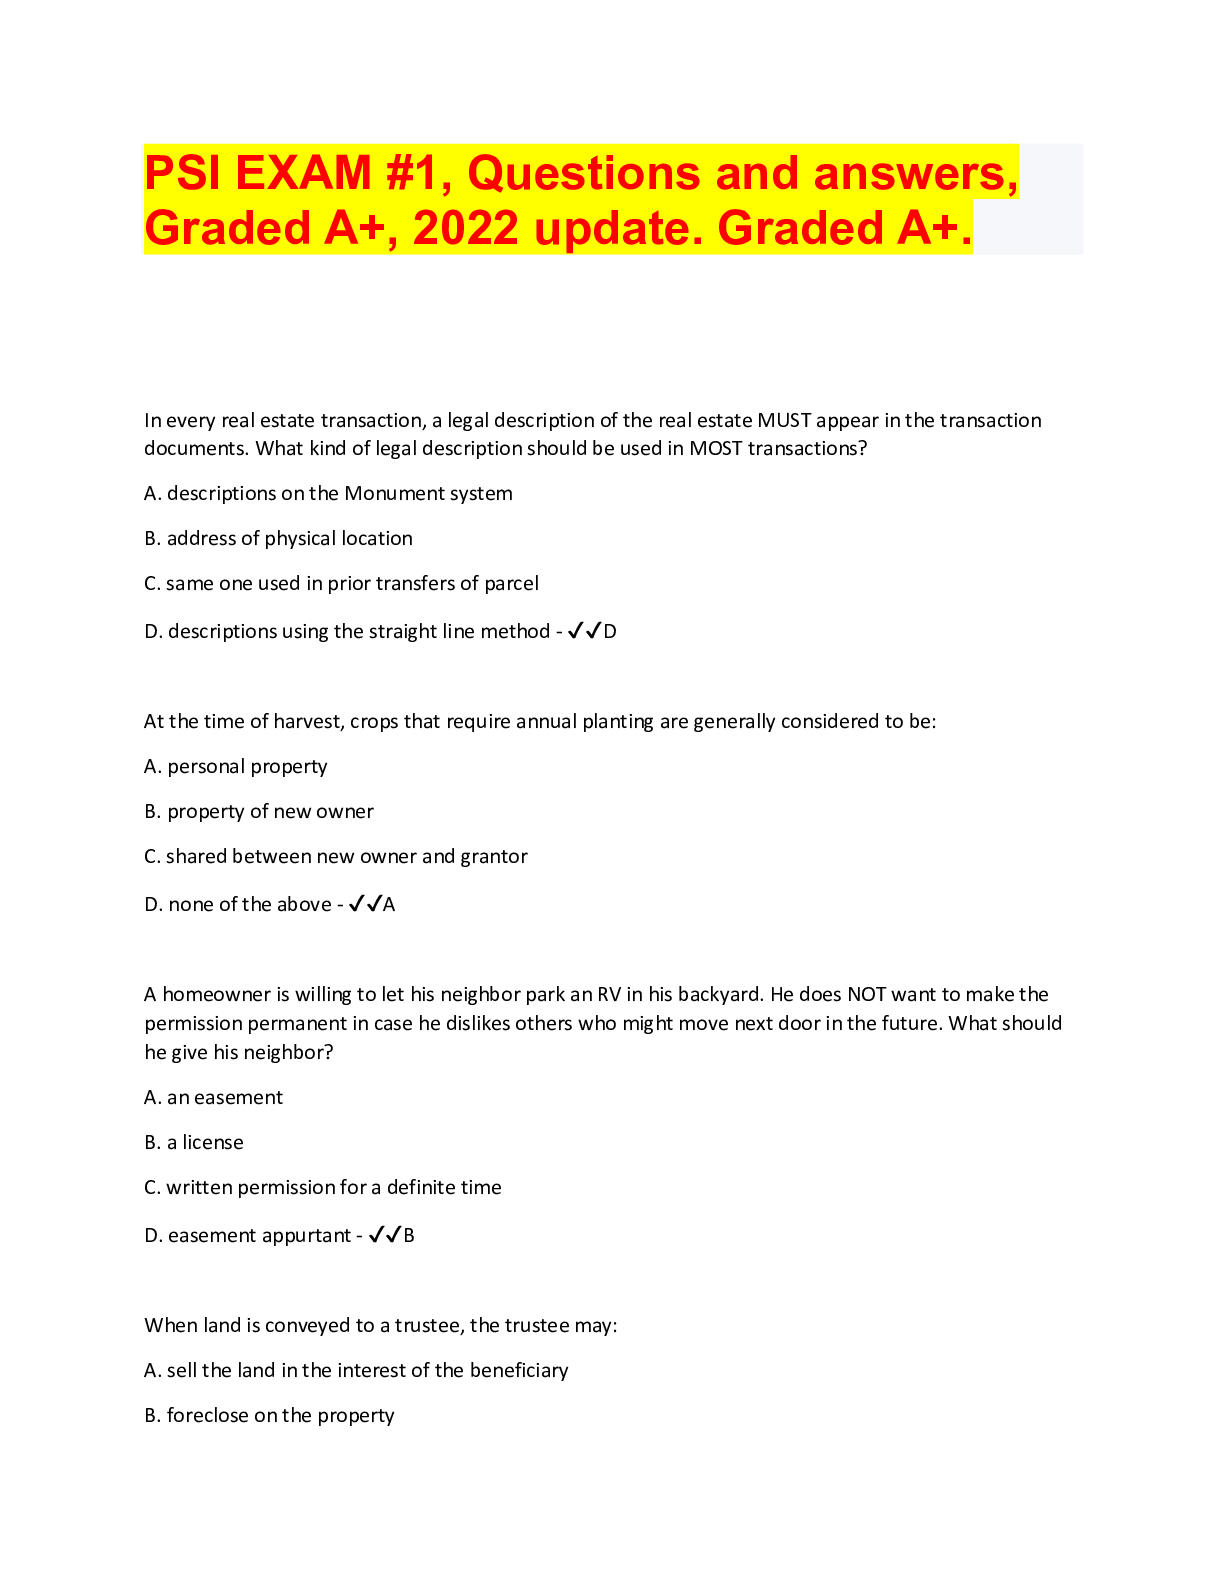 PSI EXAM 1, Questions and answers, Graded A+, 2022 update. Graded A+